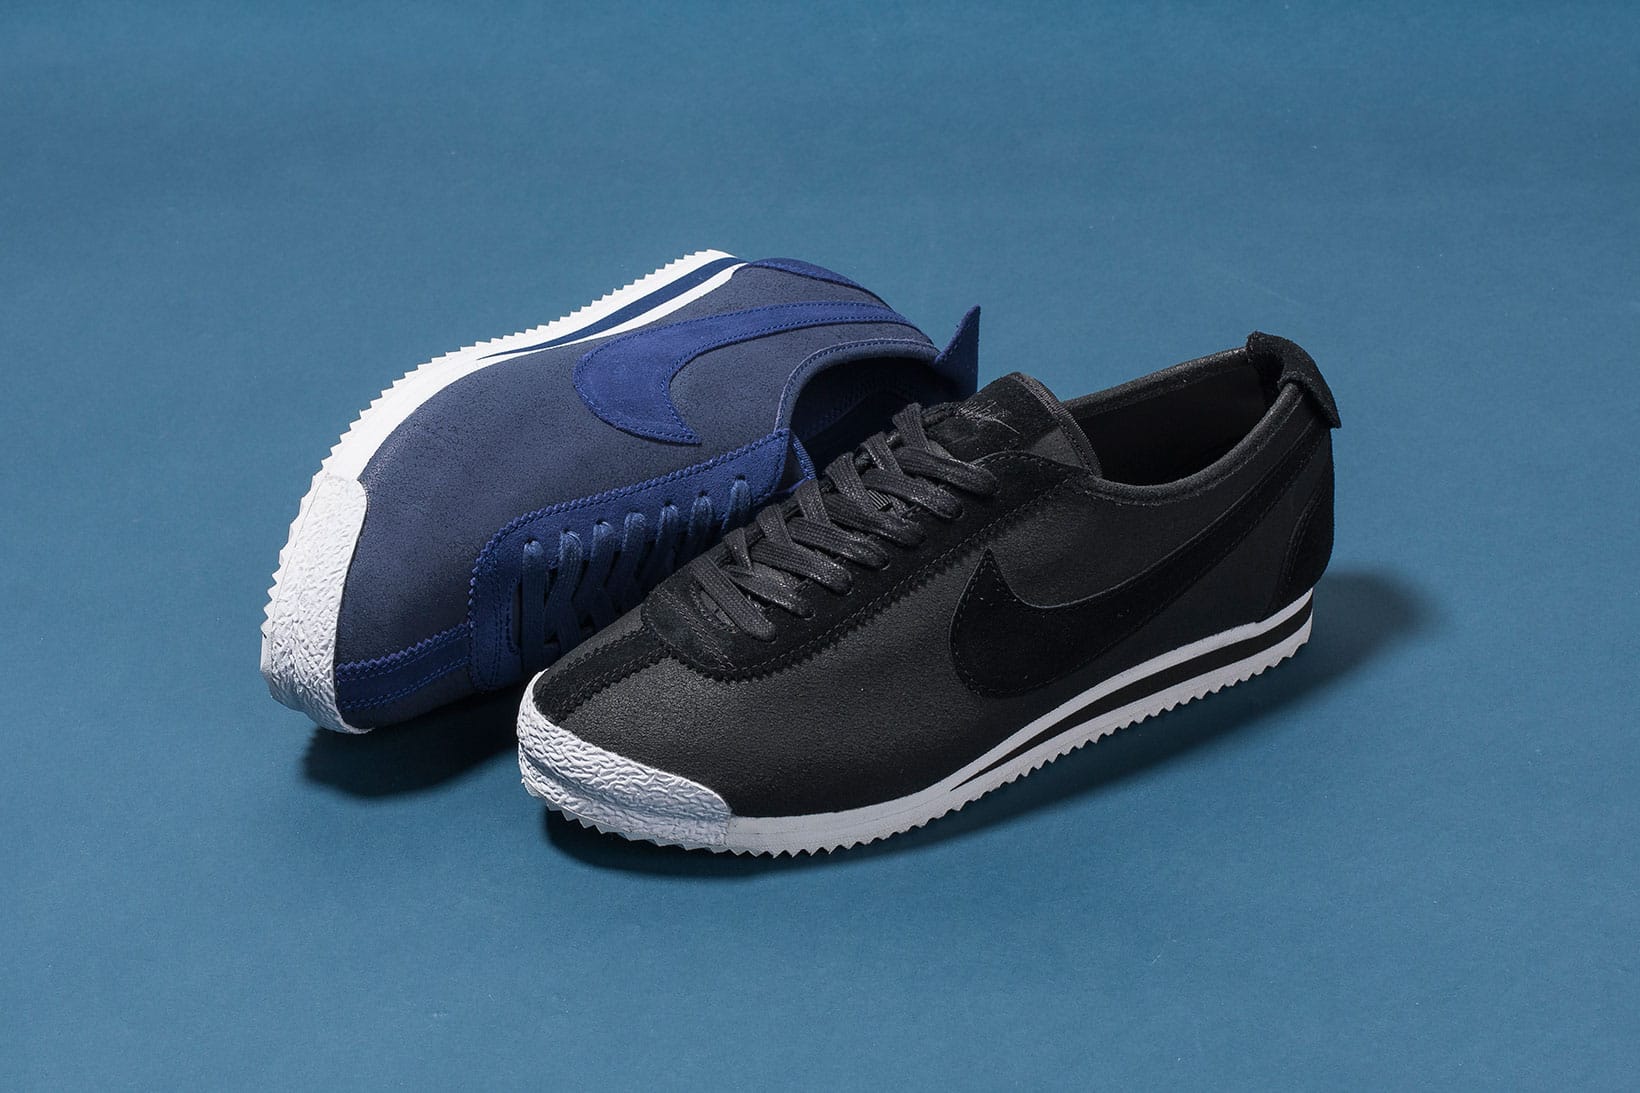 Nike Cortez 72 QS in Black and Loyal 